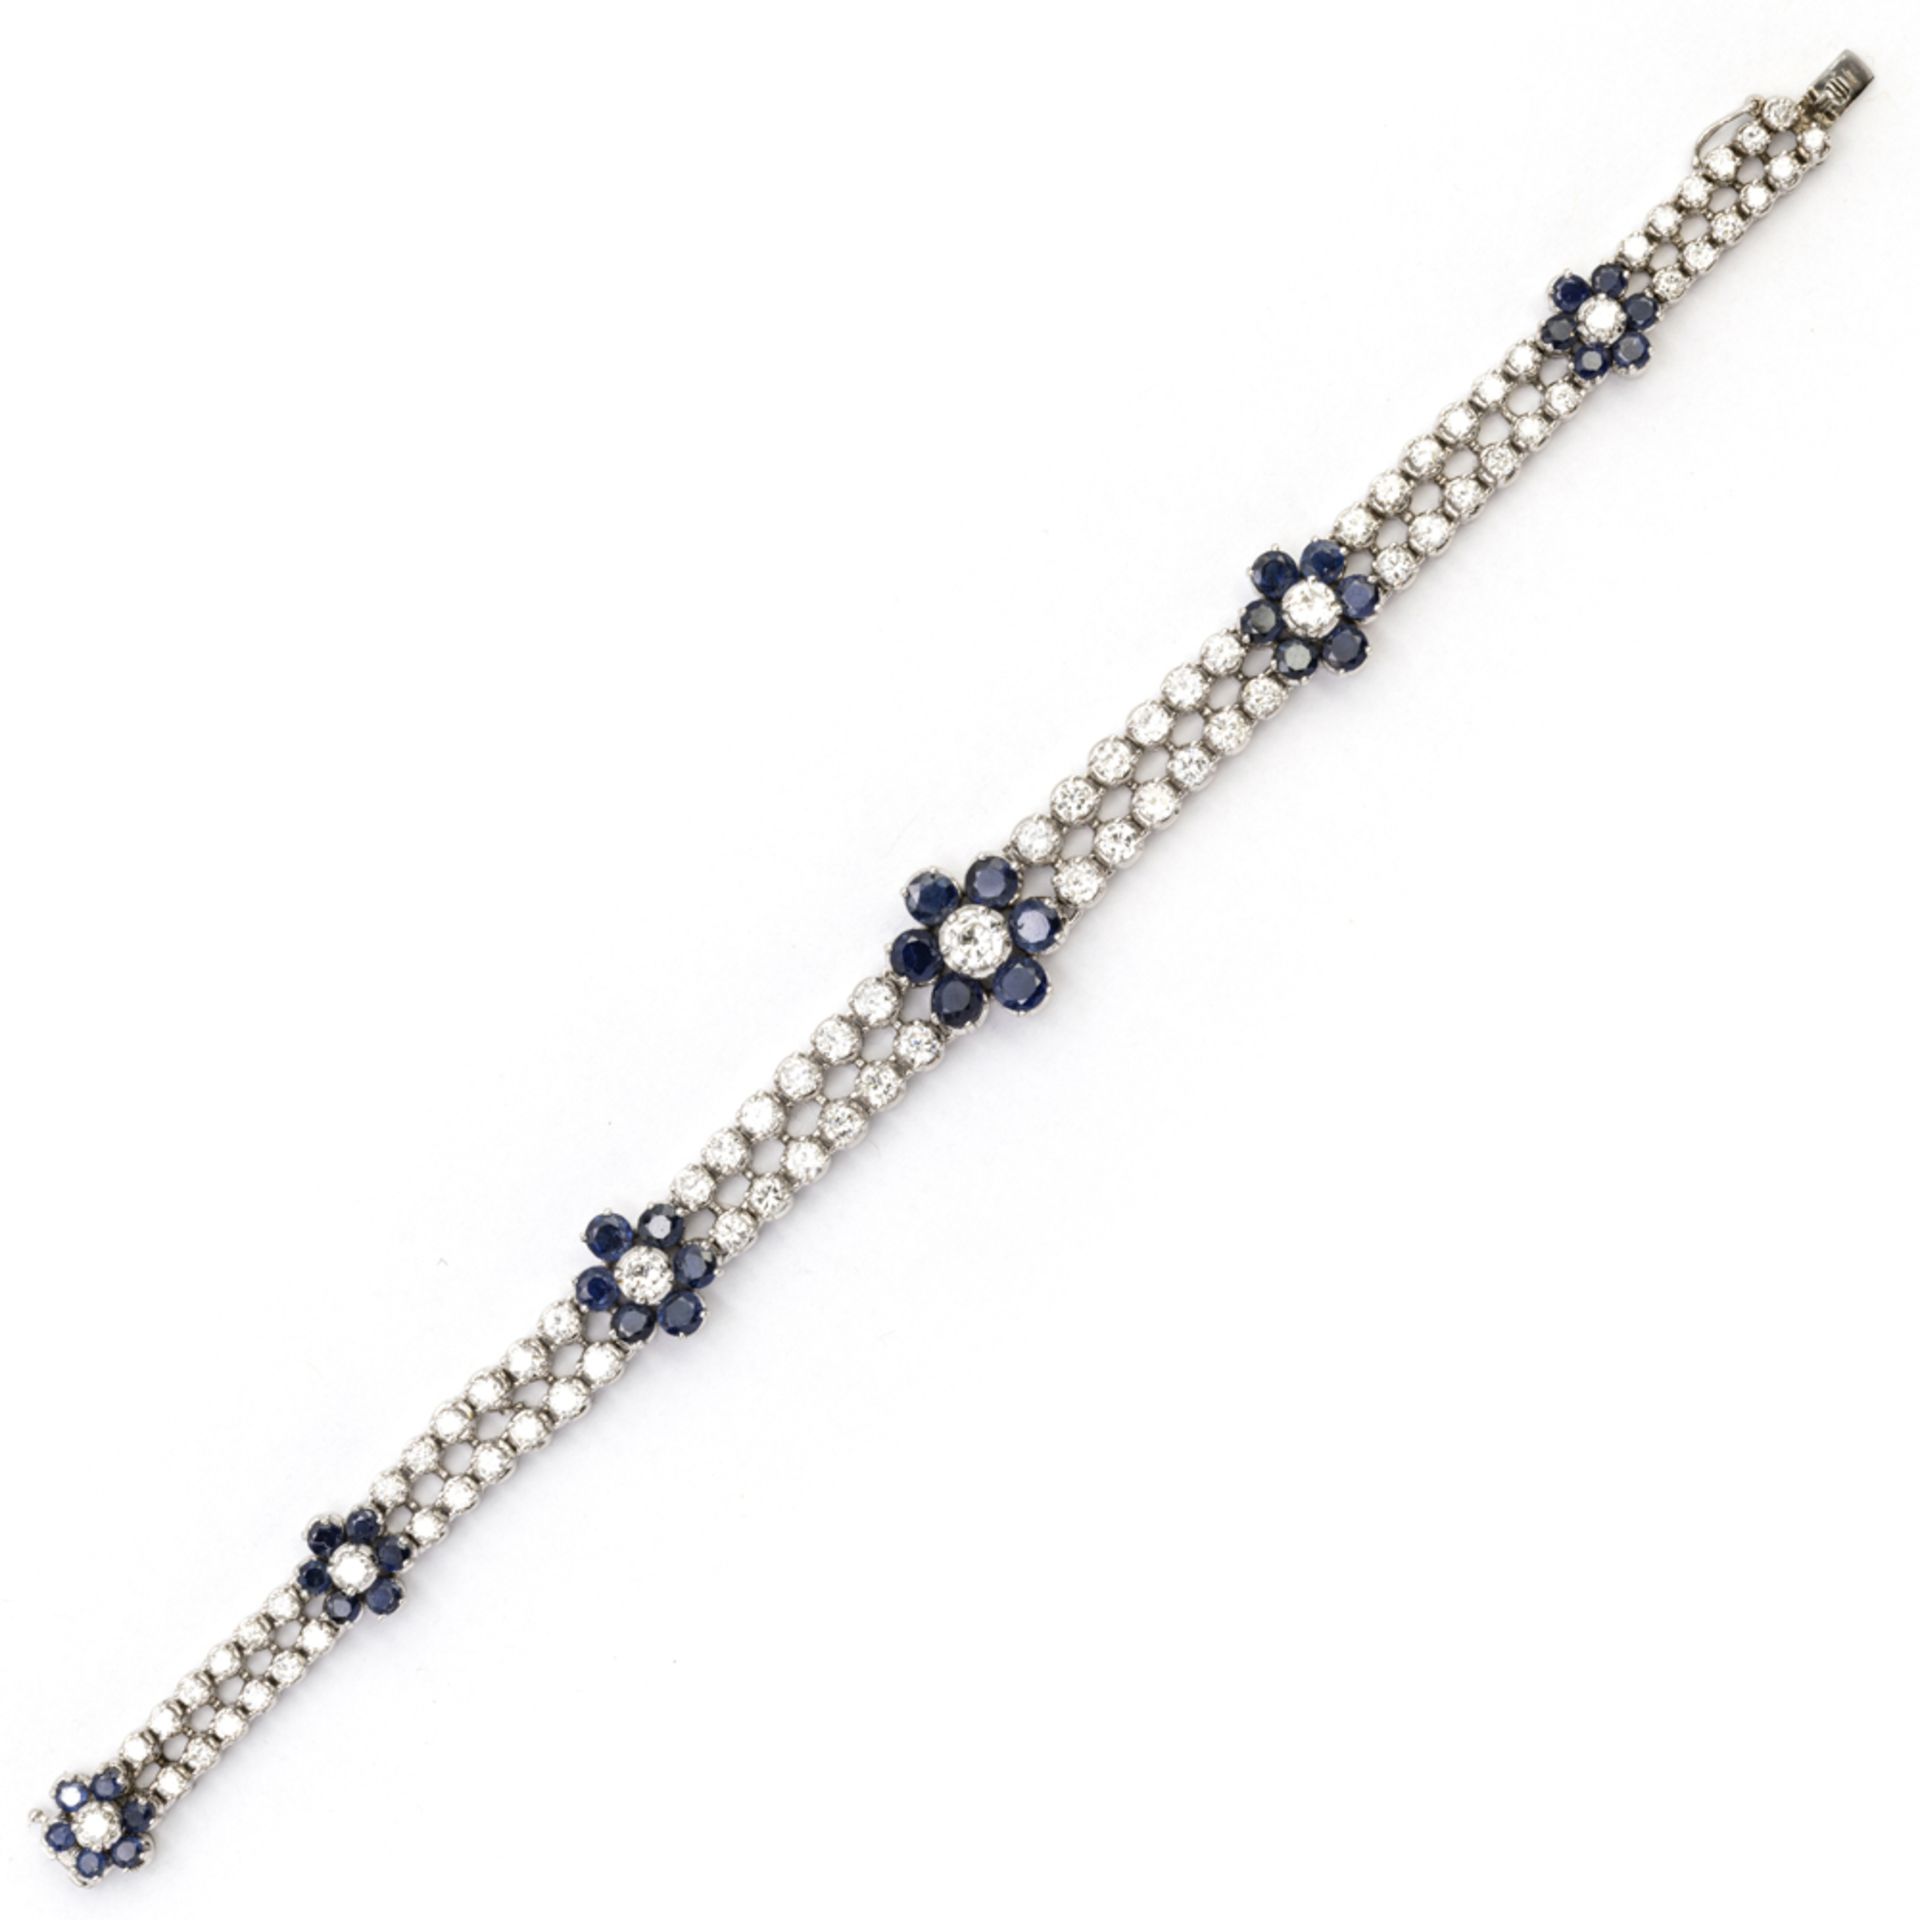 18kt white gold flowers bracelet with diamonds and sapphires - Image 2 of 2